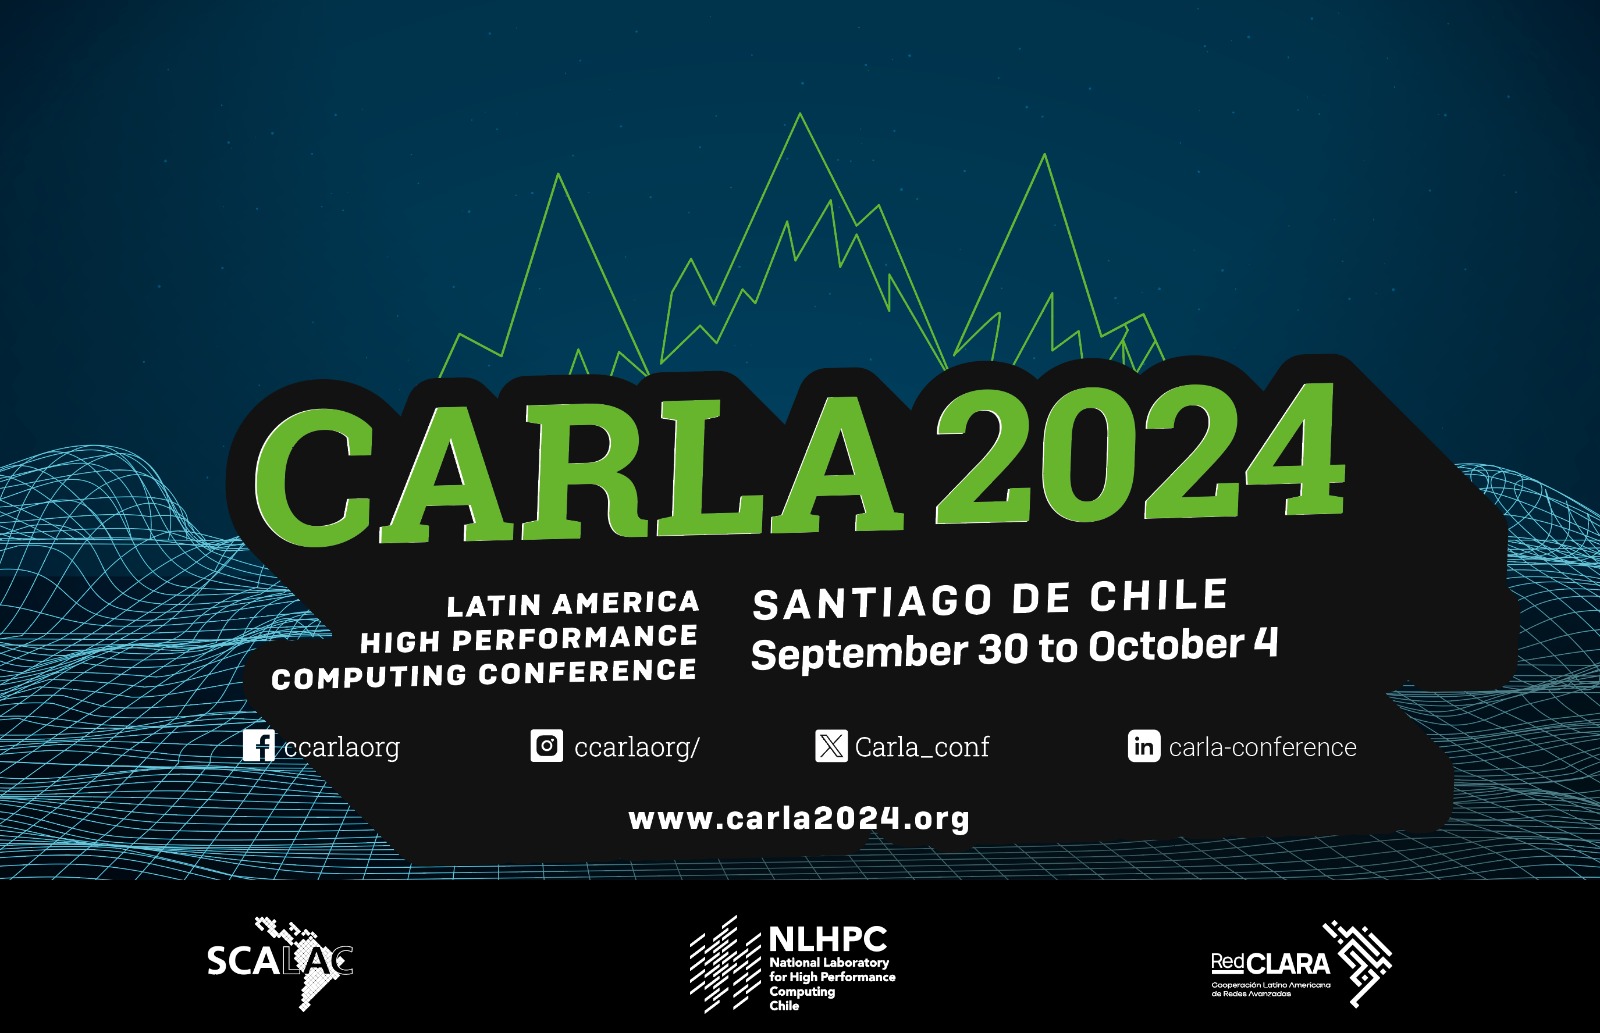 The Latin America High Performance Computing Conference comes to Santiago, Chile